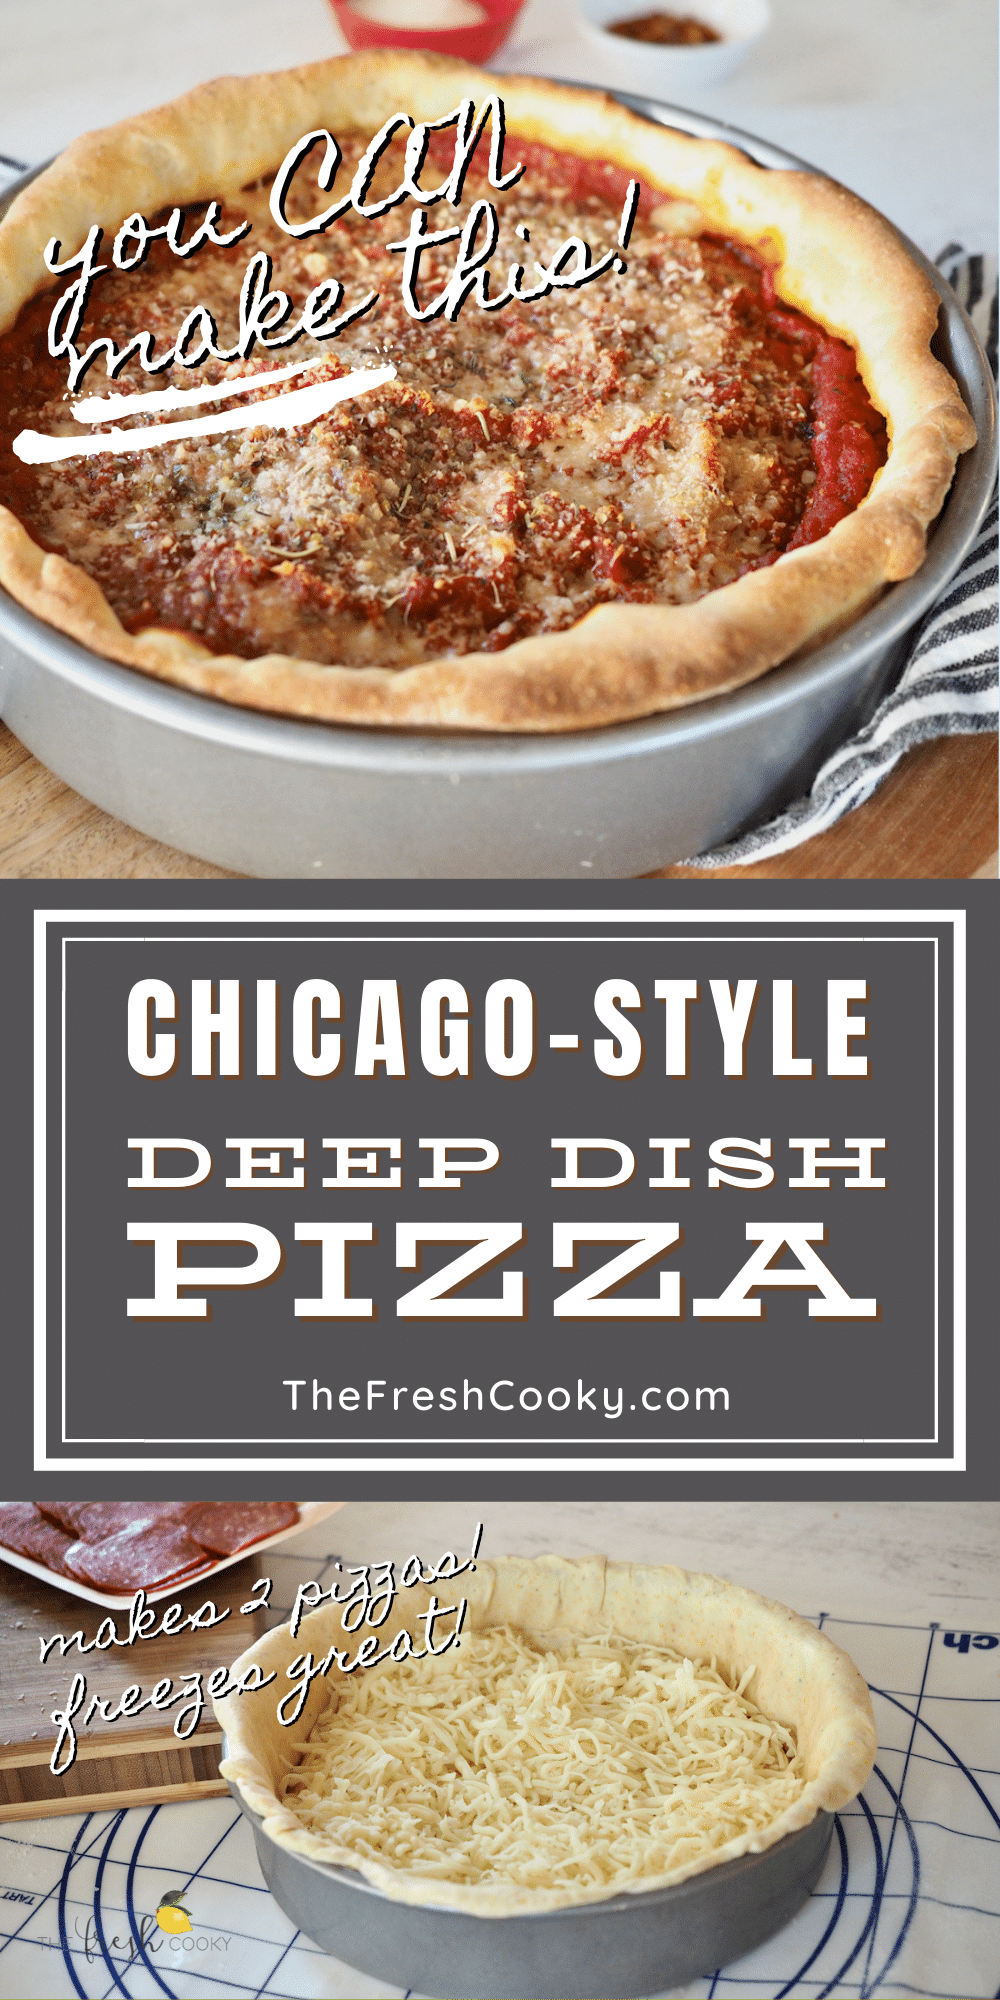 https://www.thefreshcooky.com/wp-content/uploads/2021/09/Chicago-Style-Deep-Dish-Pizza-LP-2.png